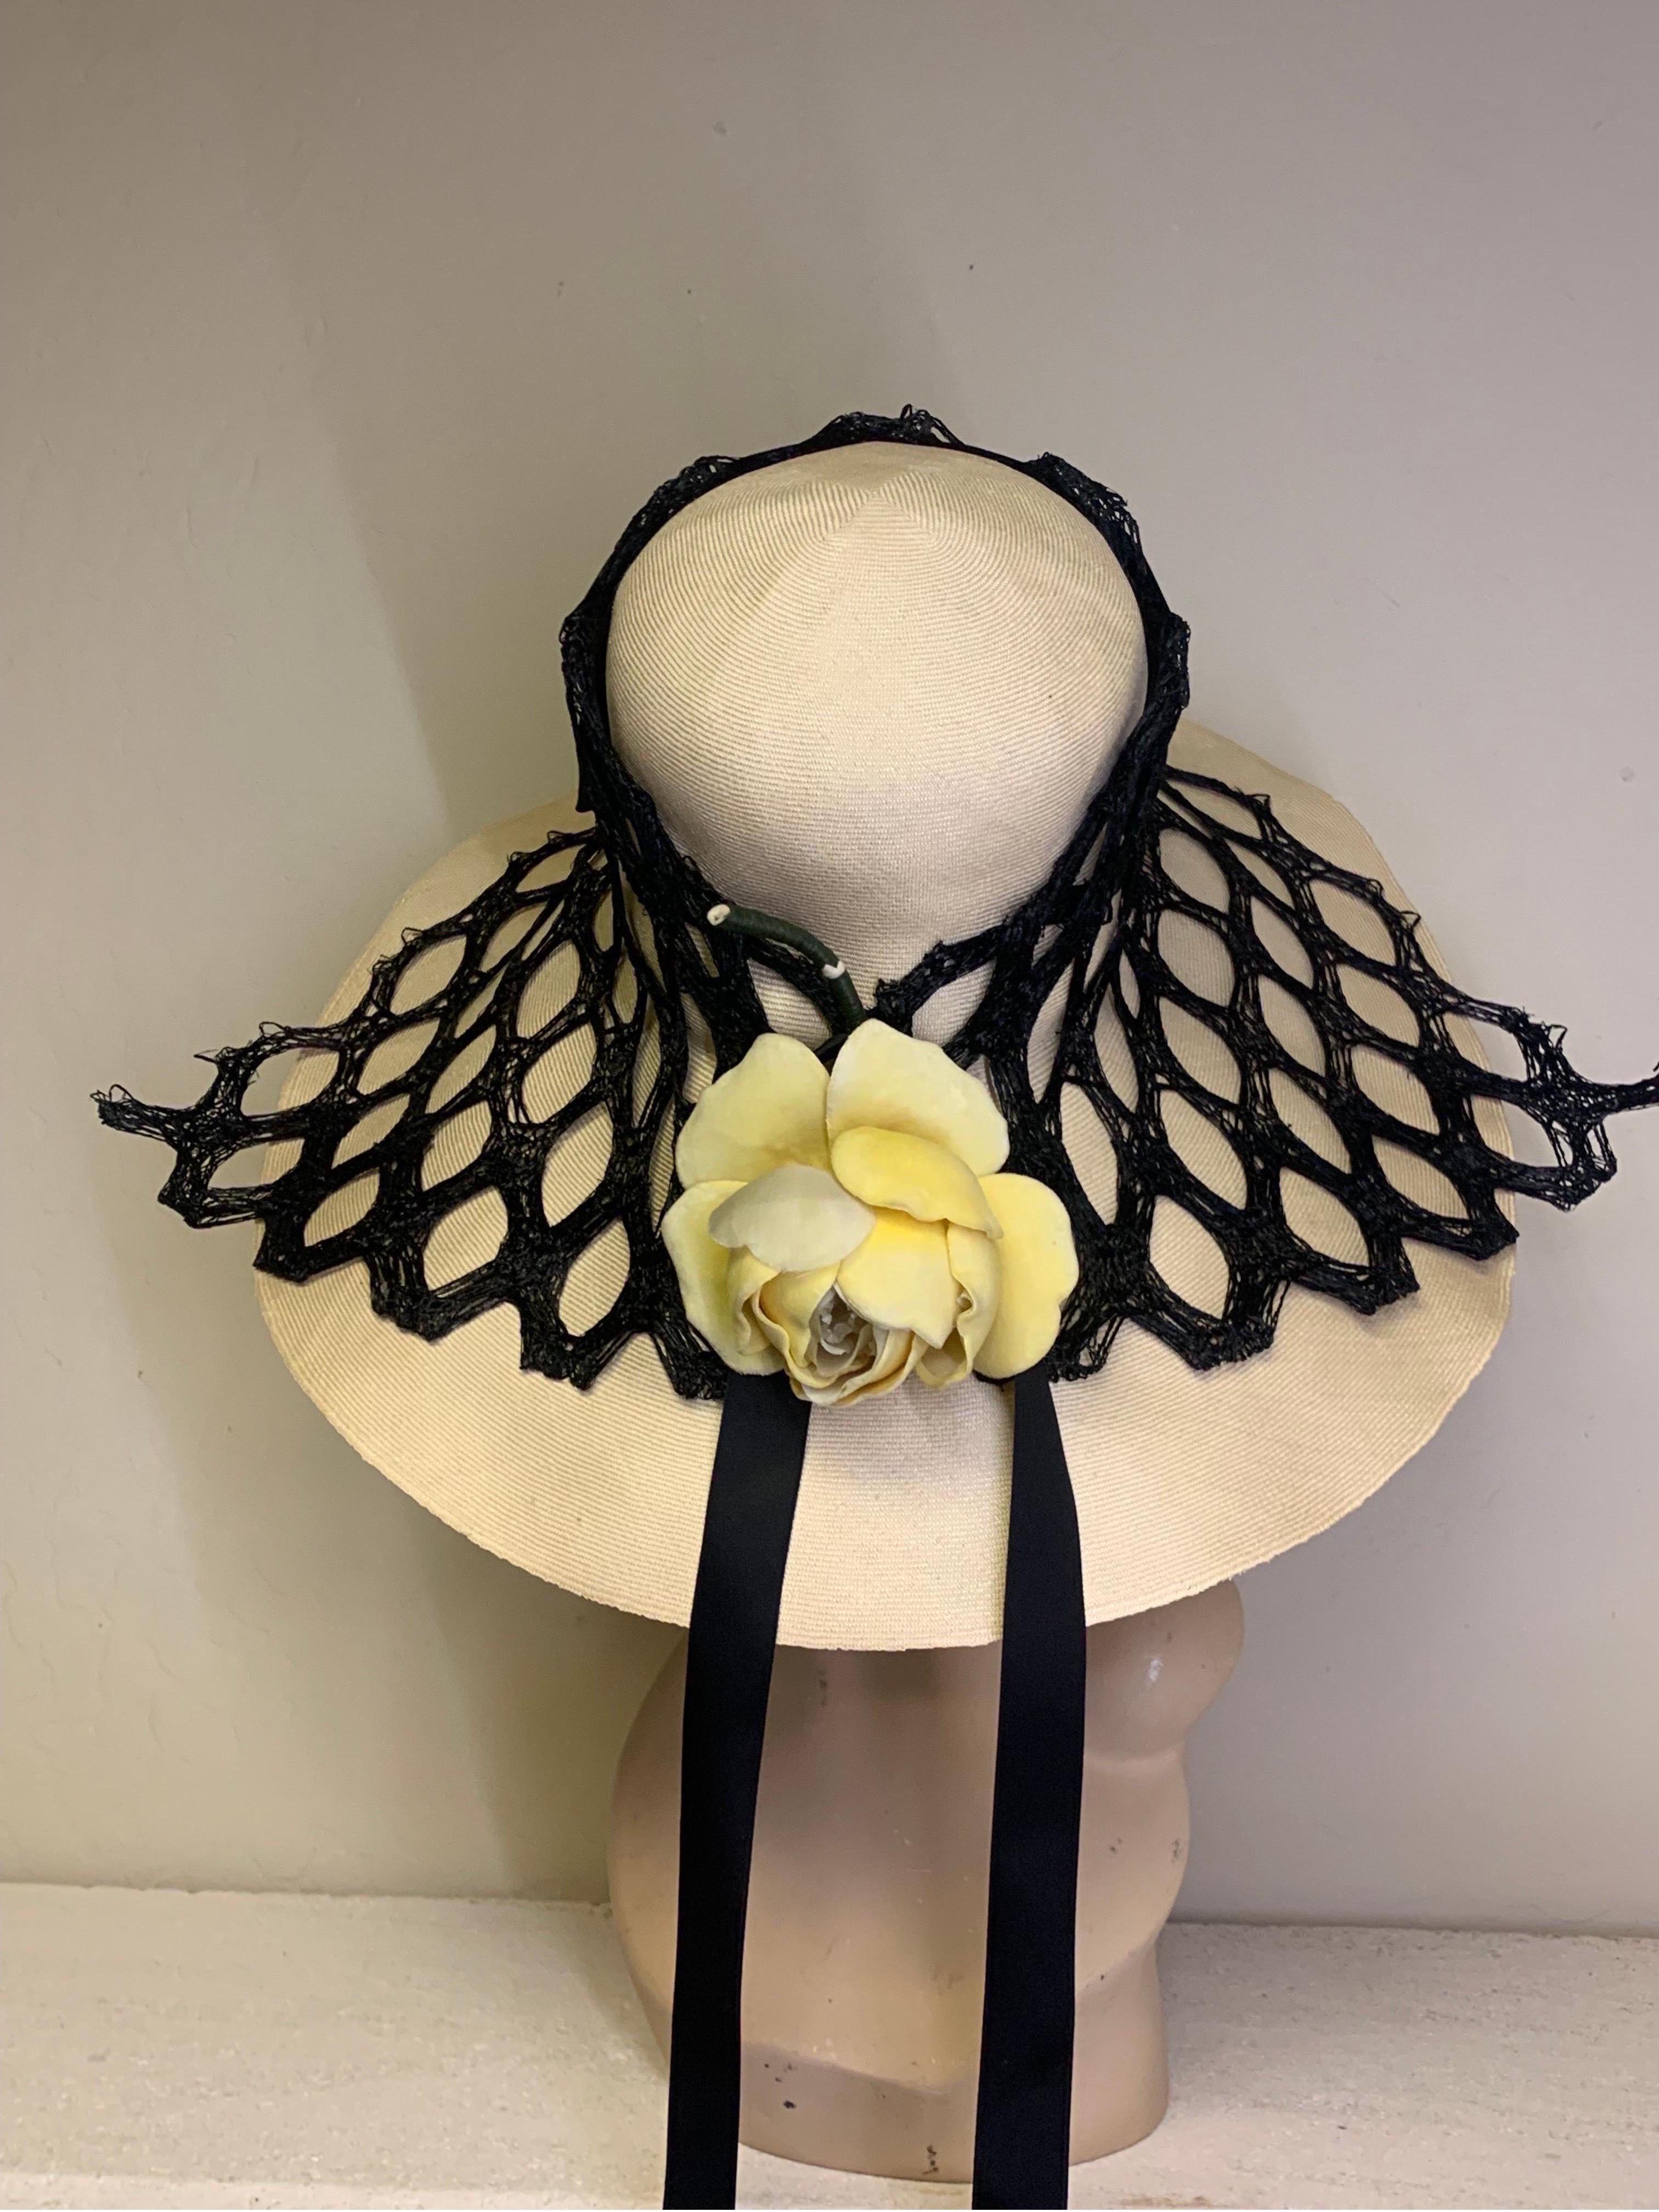 A striking 1960s Adolfo natural straw beach hat with extra wide brim and heavy veiling mesh drape with yellow silk rose accent. A silk satin ribbon is woven through top of mesh band and trails down back. Medium size. 